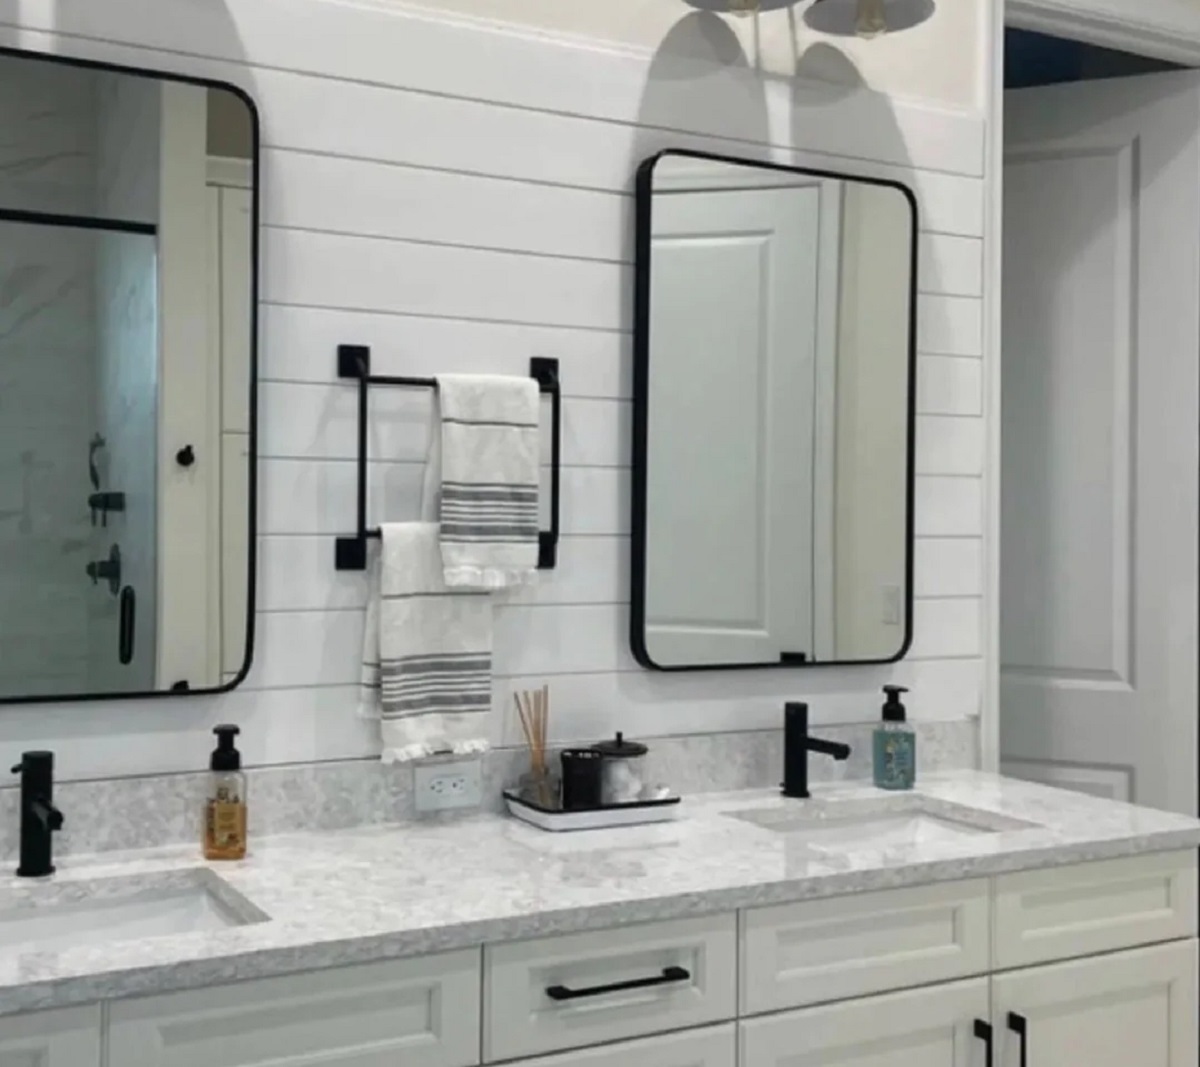 How High To Mount The Towel Bar Above The Sink